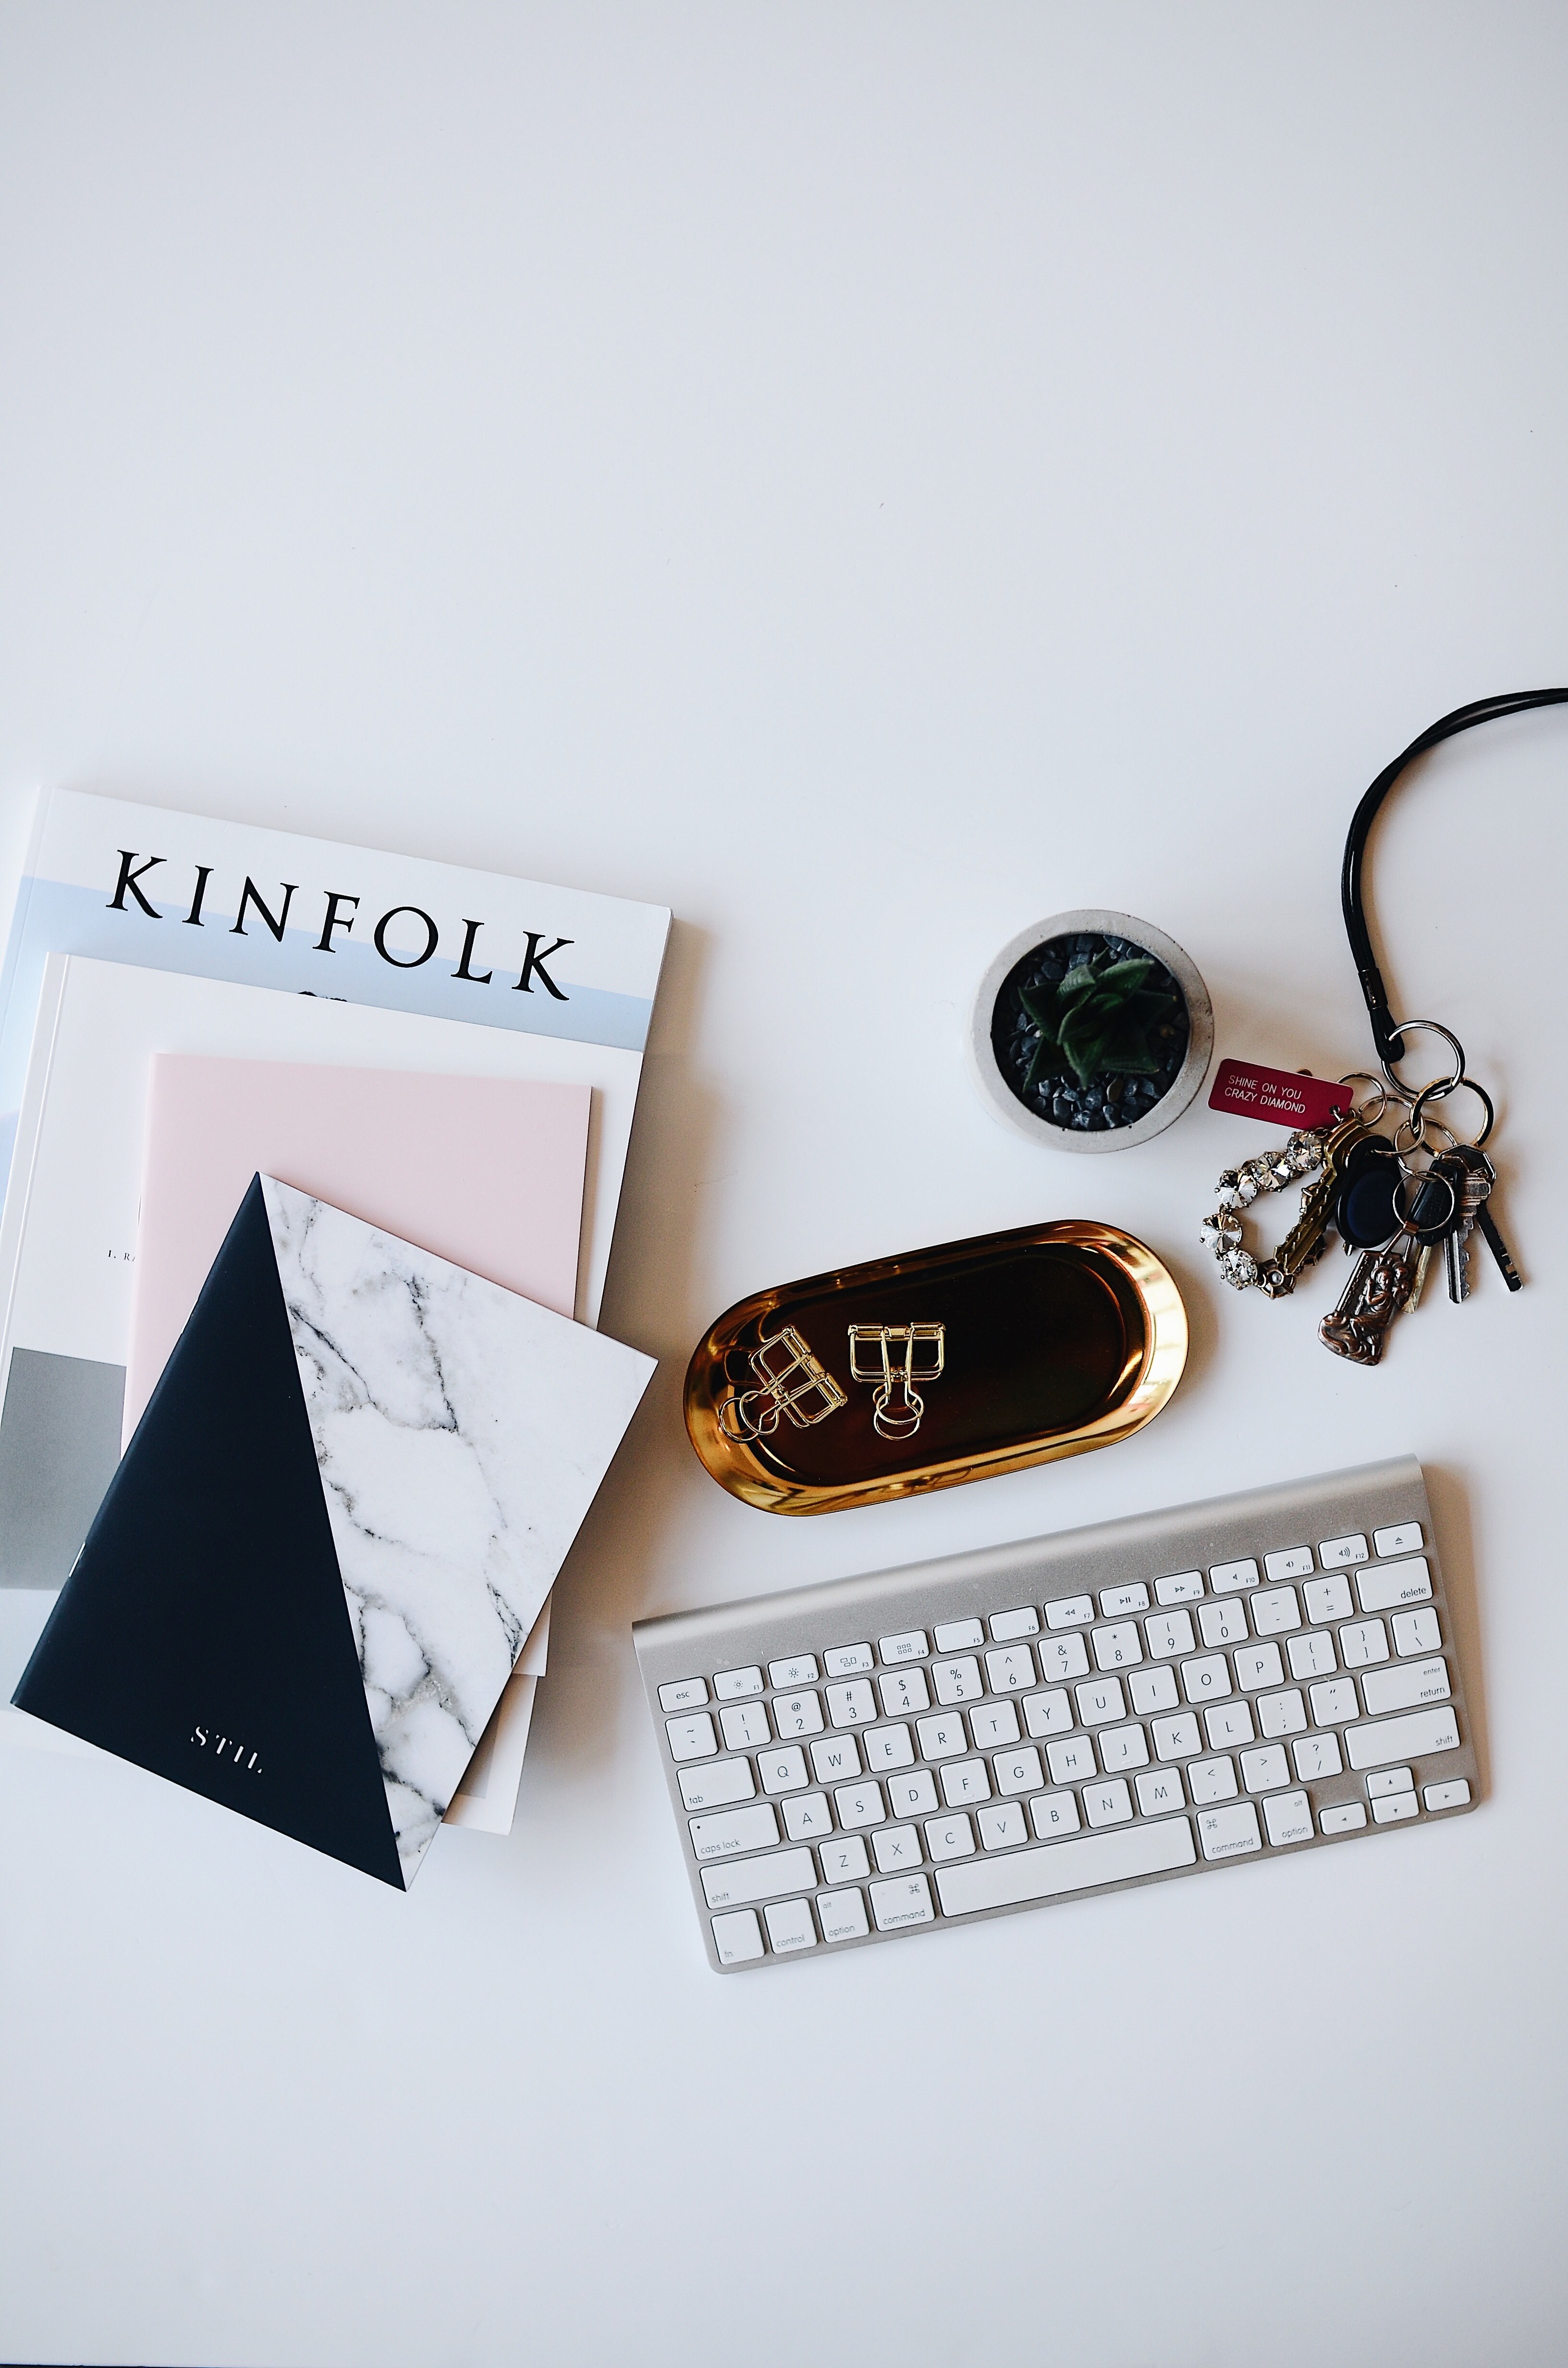 a flatlay image of a keyboard books and other items desk